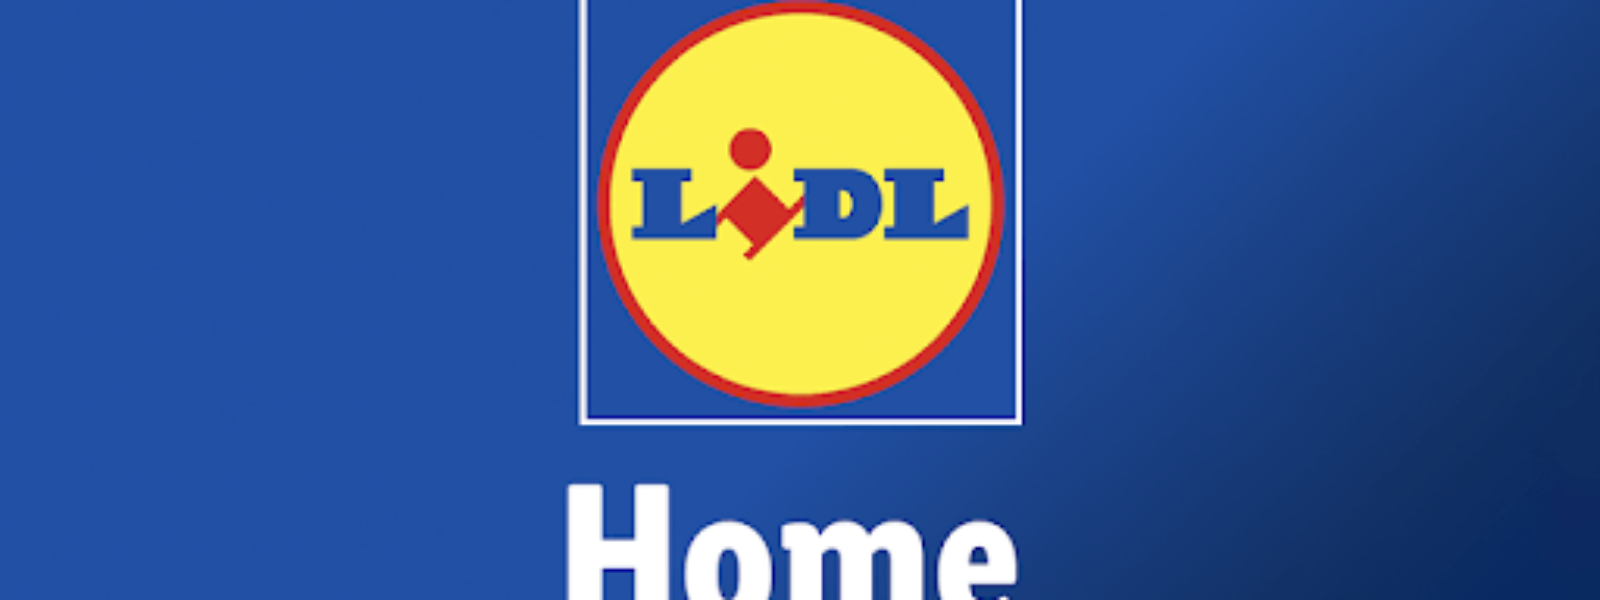 Lidl Home pentru Android | iOS